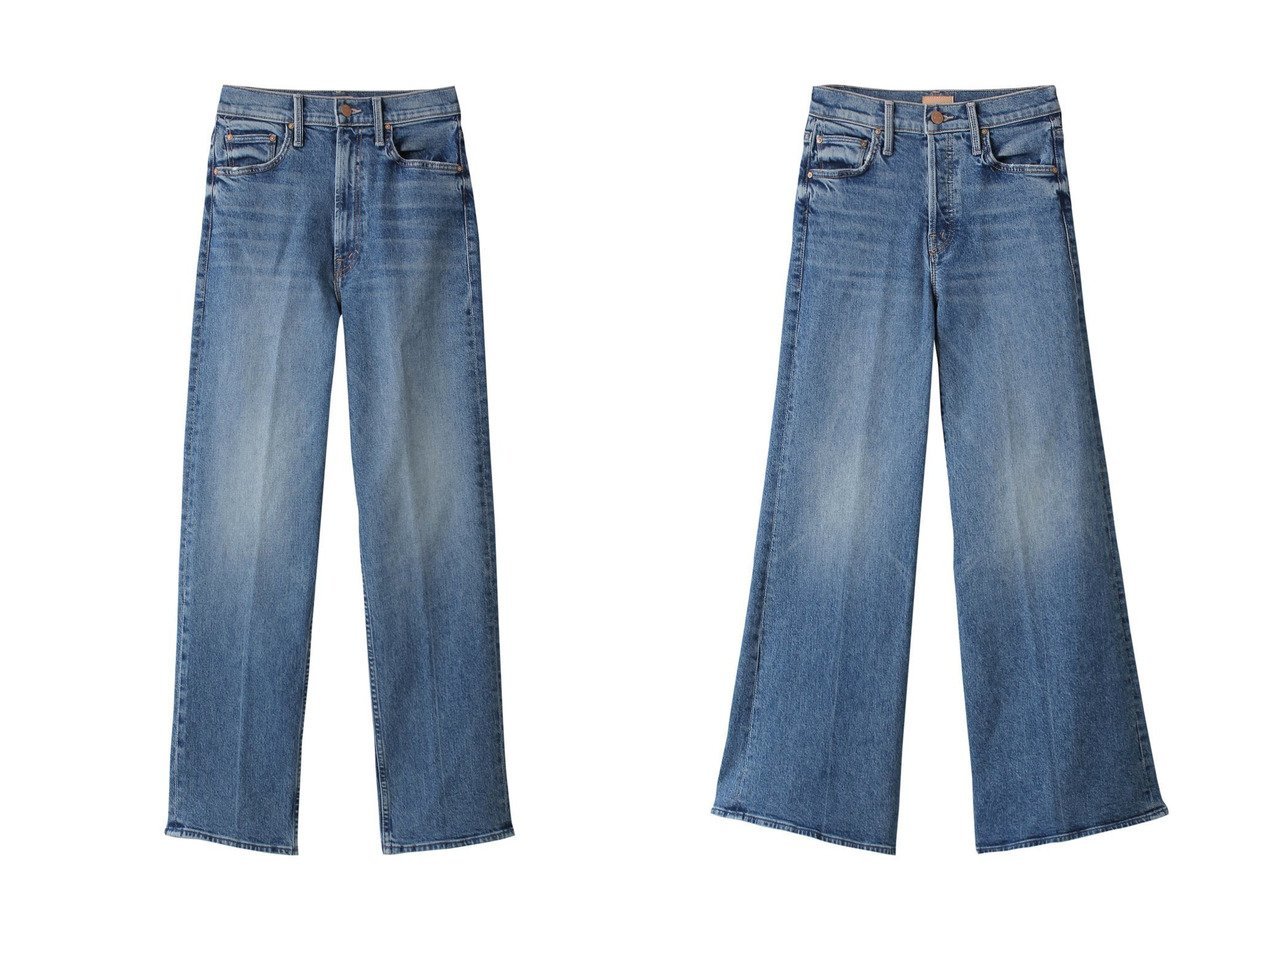 Mother Denim Study Hover Treating Myself – The Blue Collection